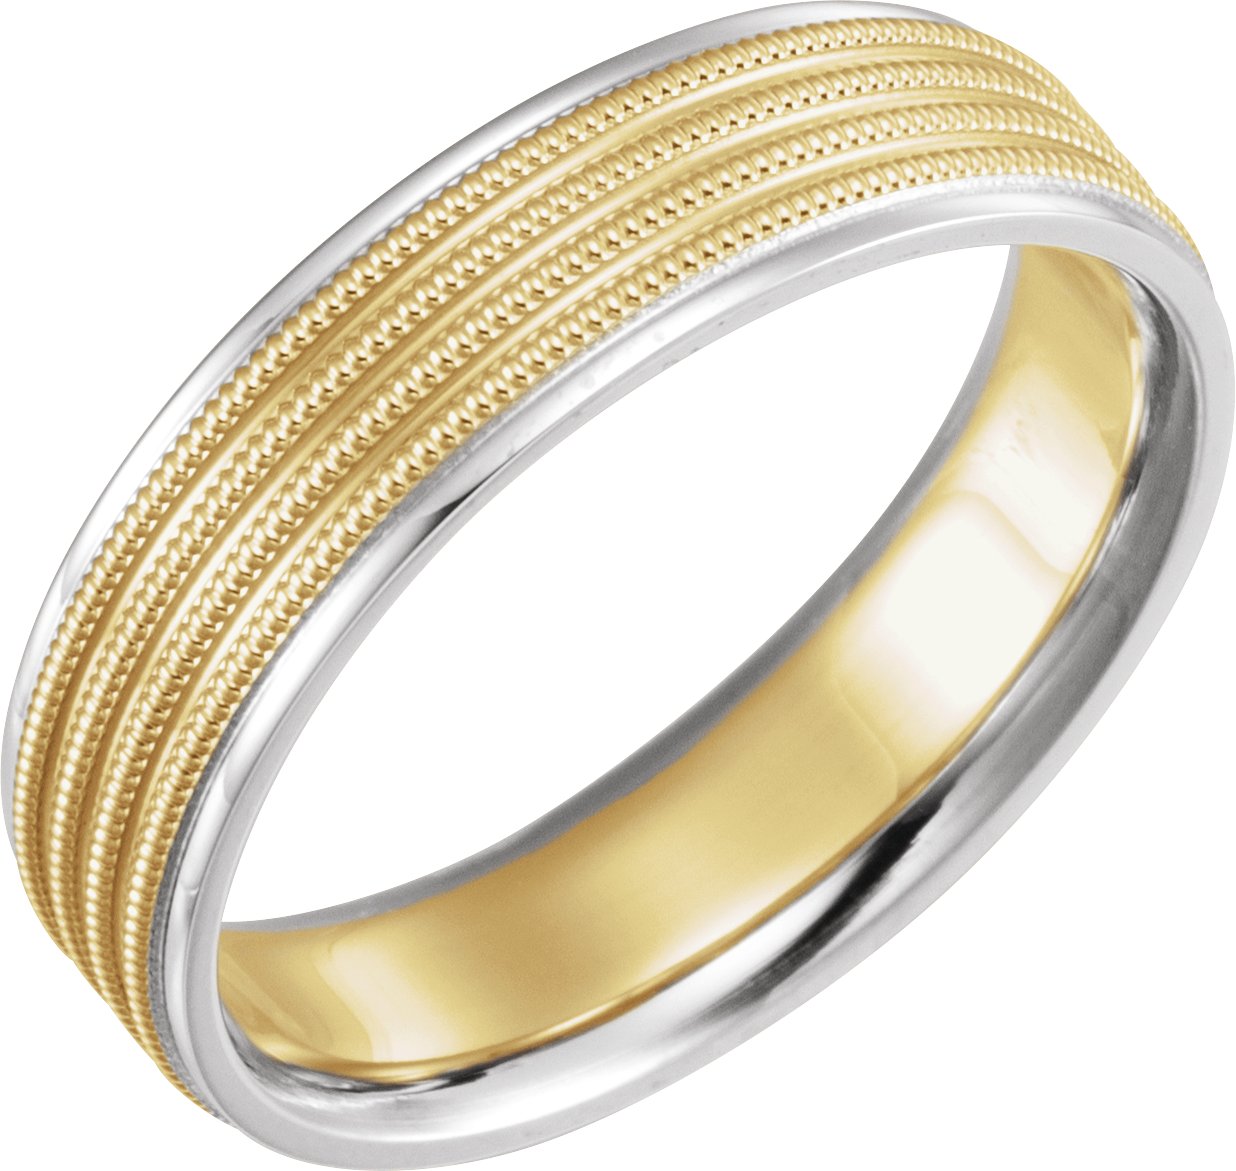 14K White and Yellow 6 mm Grooved Band with Milgrain Size 5.5 Ref 2273859